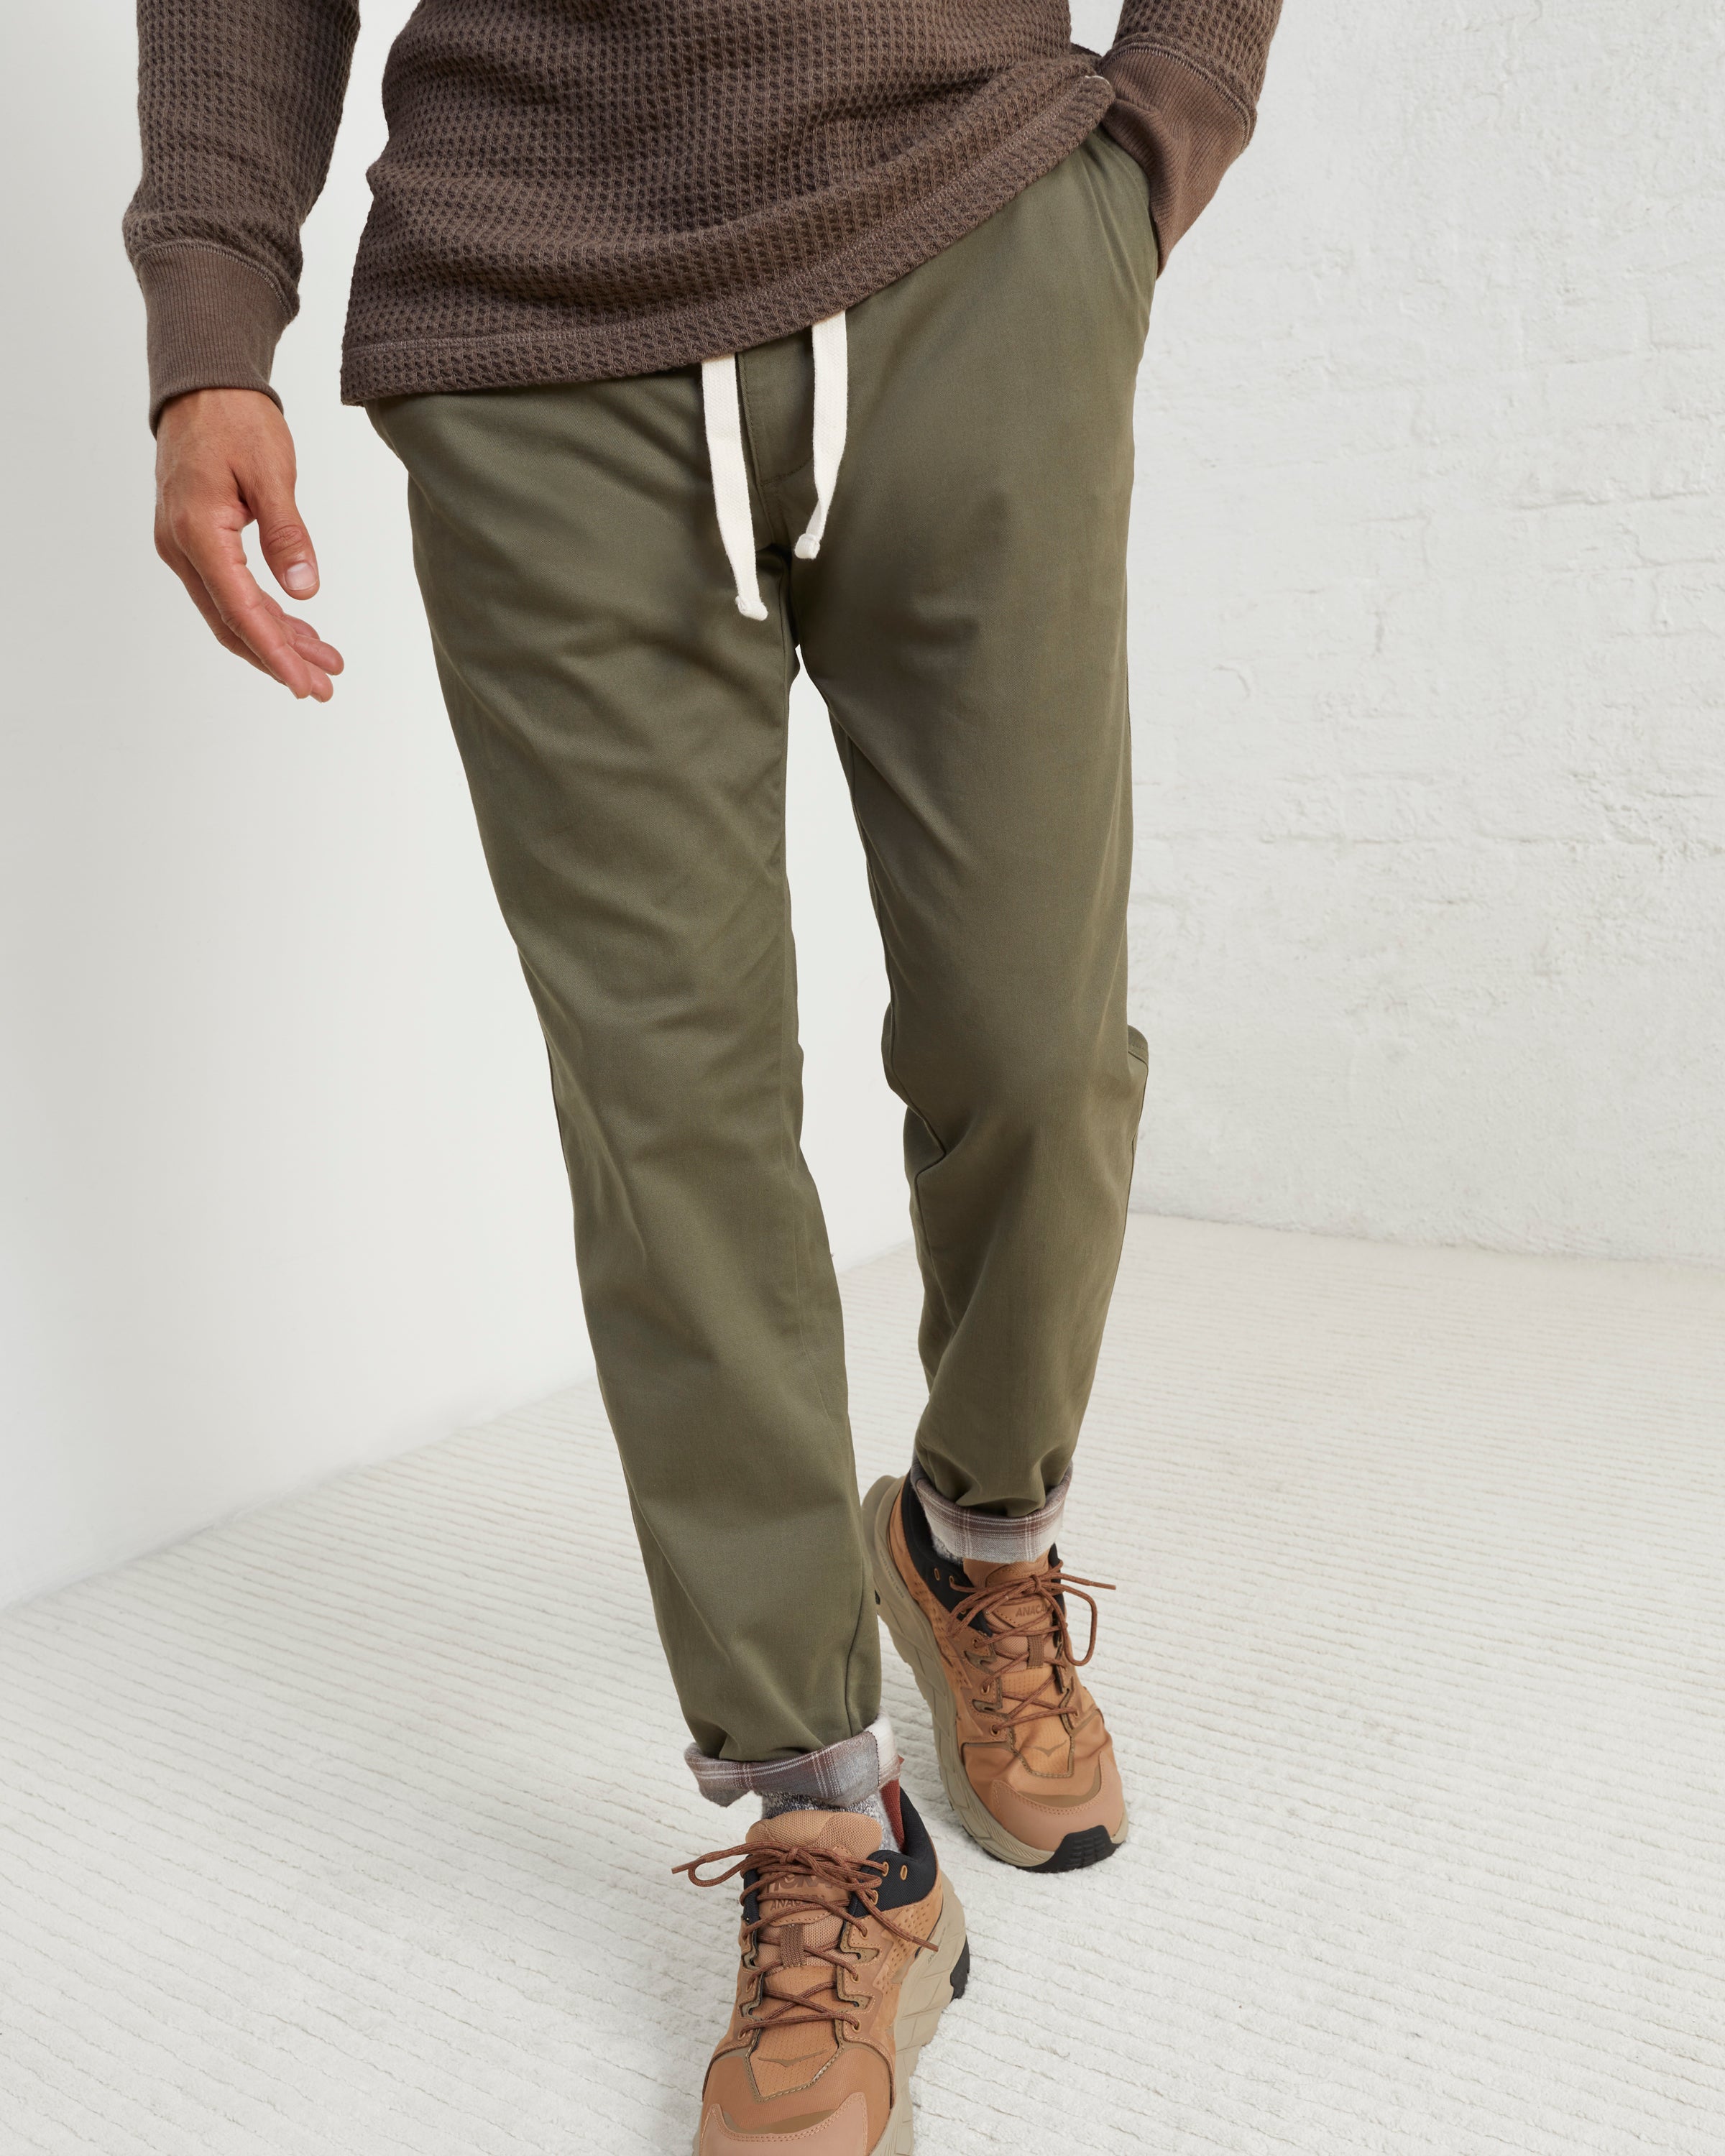 Departwest Moto Jogger Stretch Chino Pant - Men's Pants in